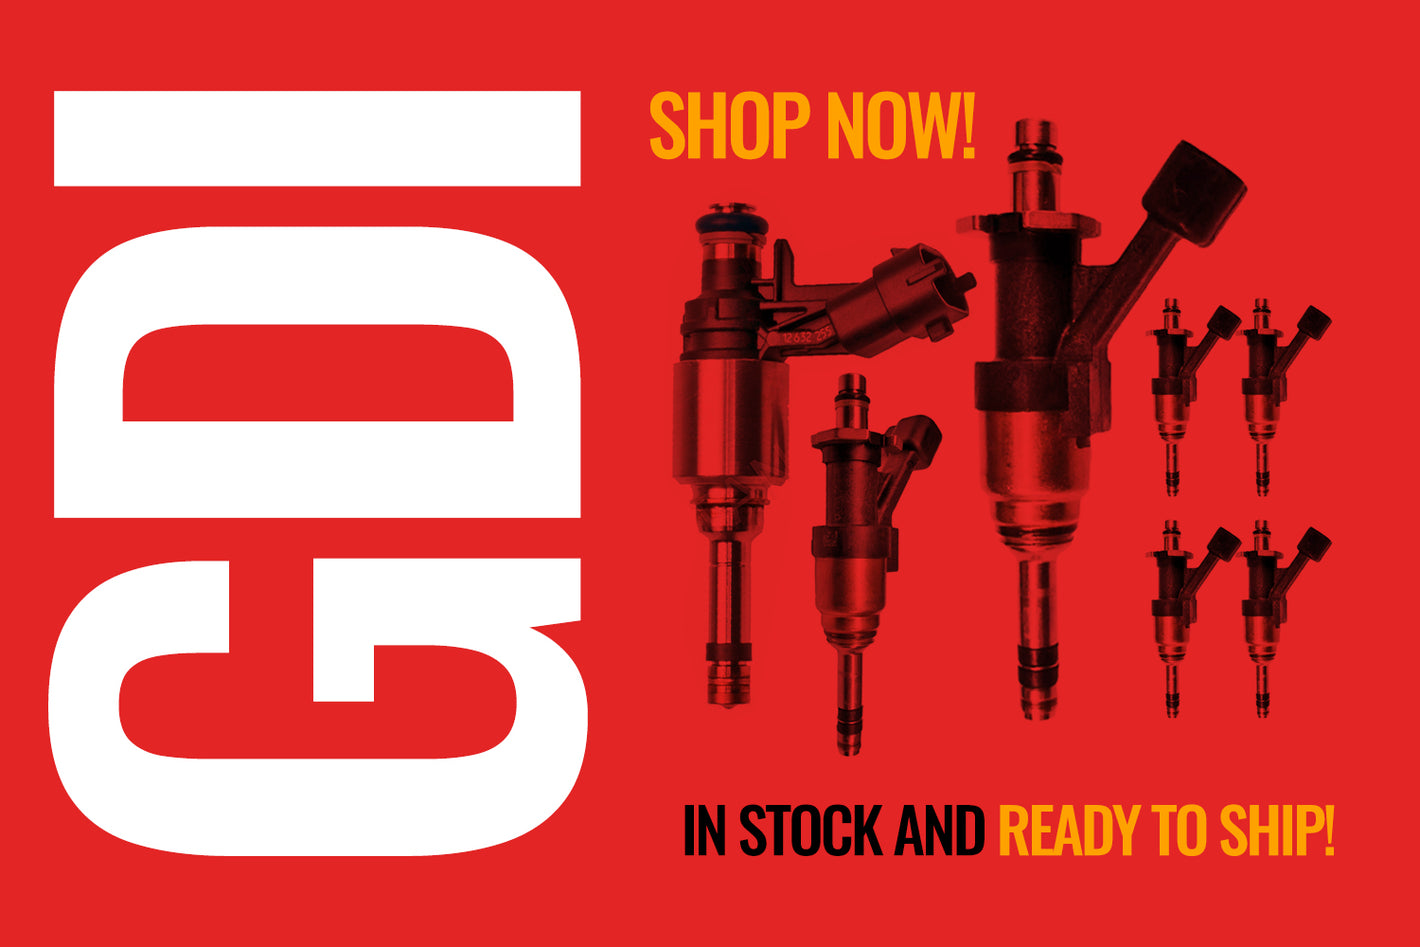 GDI Fuel Injectors In Stock and Ready to Ship at InjectorExperts.com